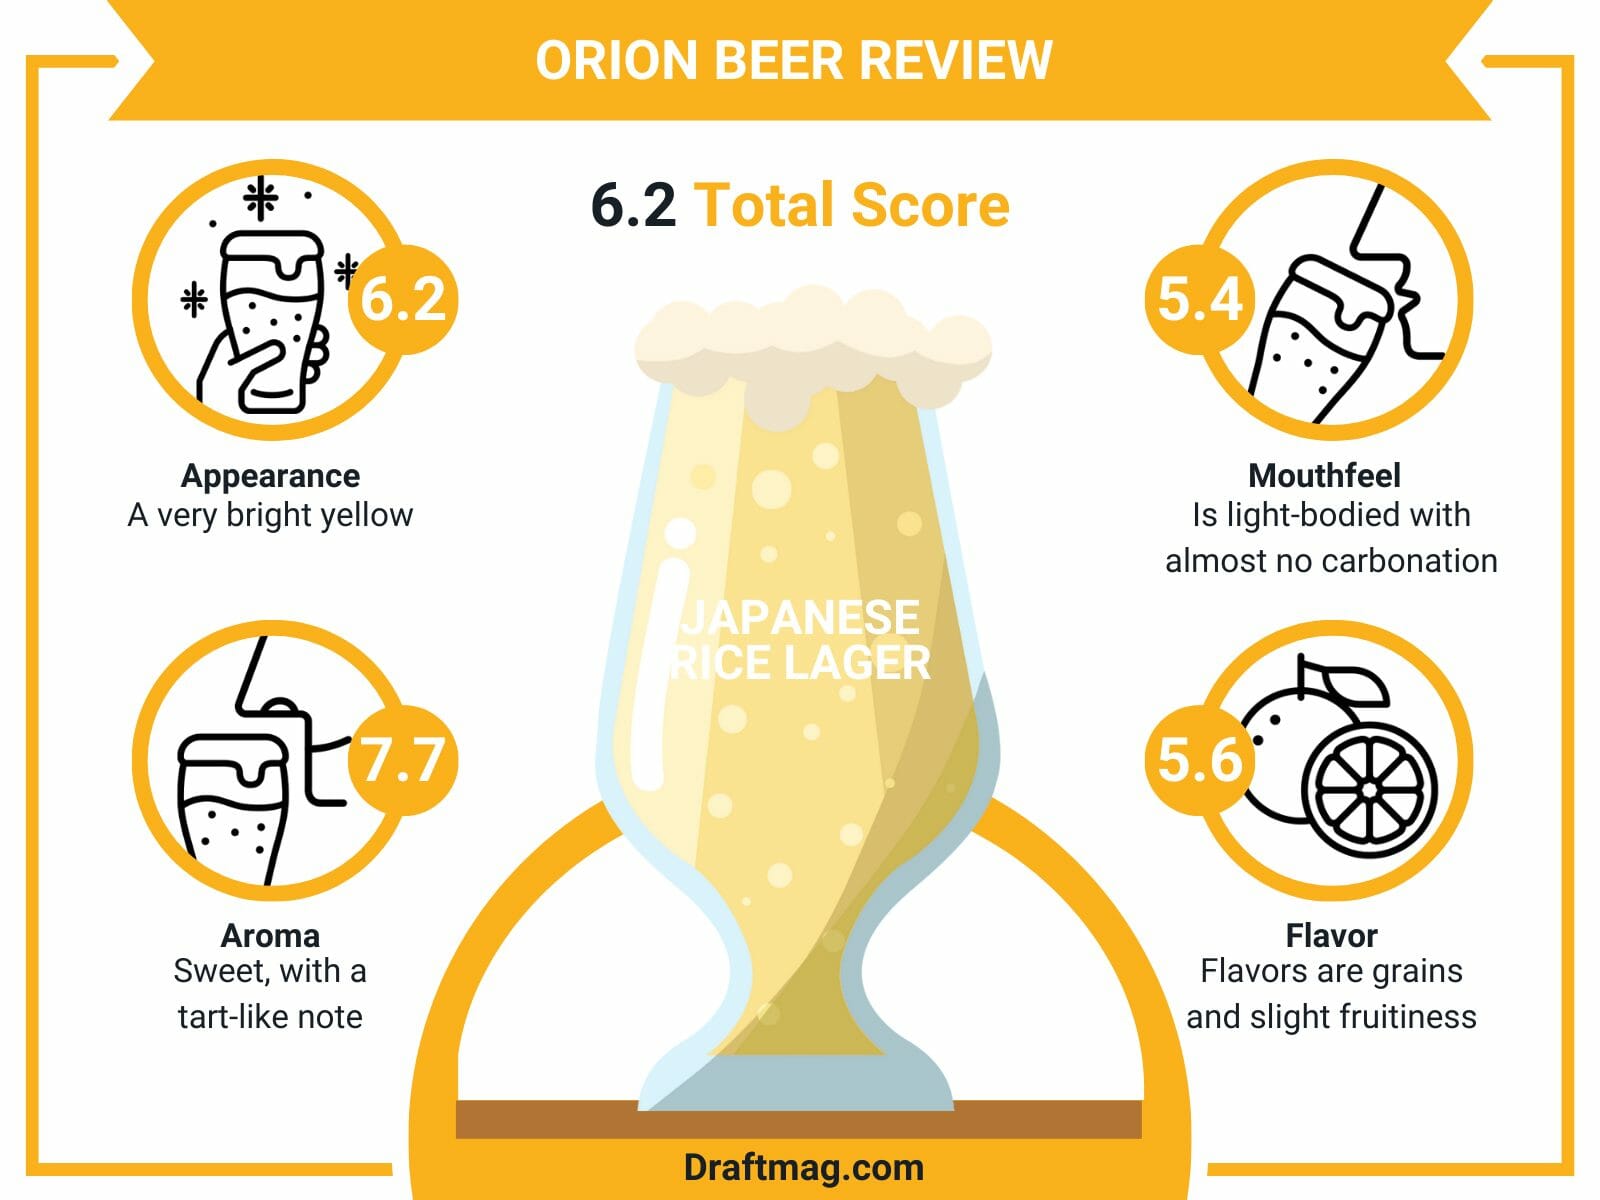 Onion beer review infographic